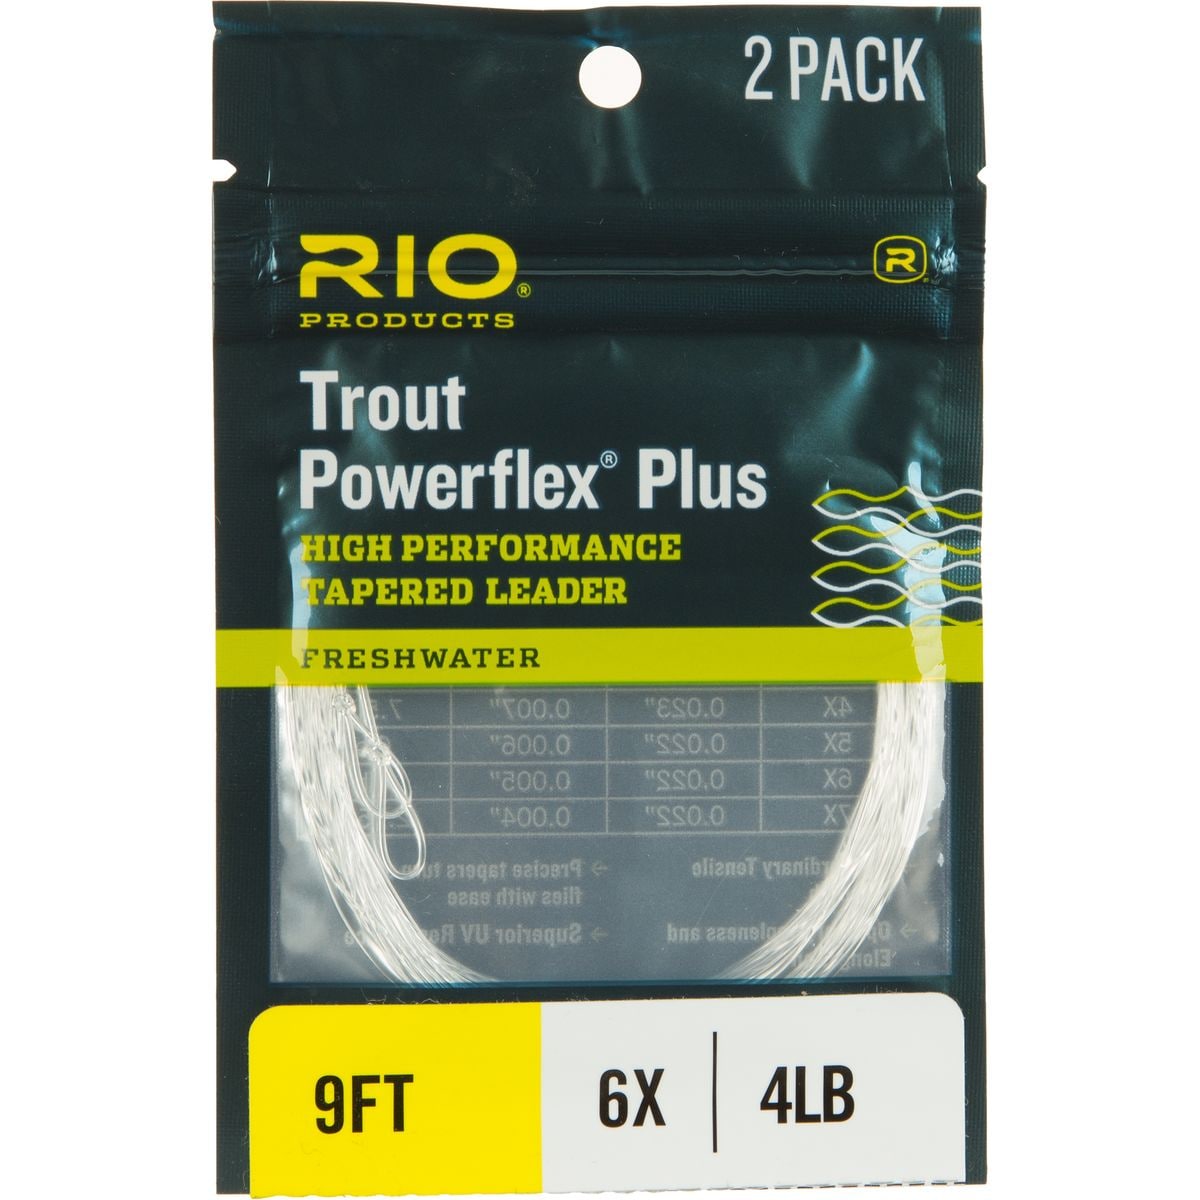 CLOSEOUT 7X Rio Powerflex Trout Tapered Leader 7.5ft 